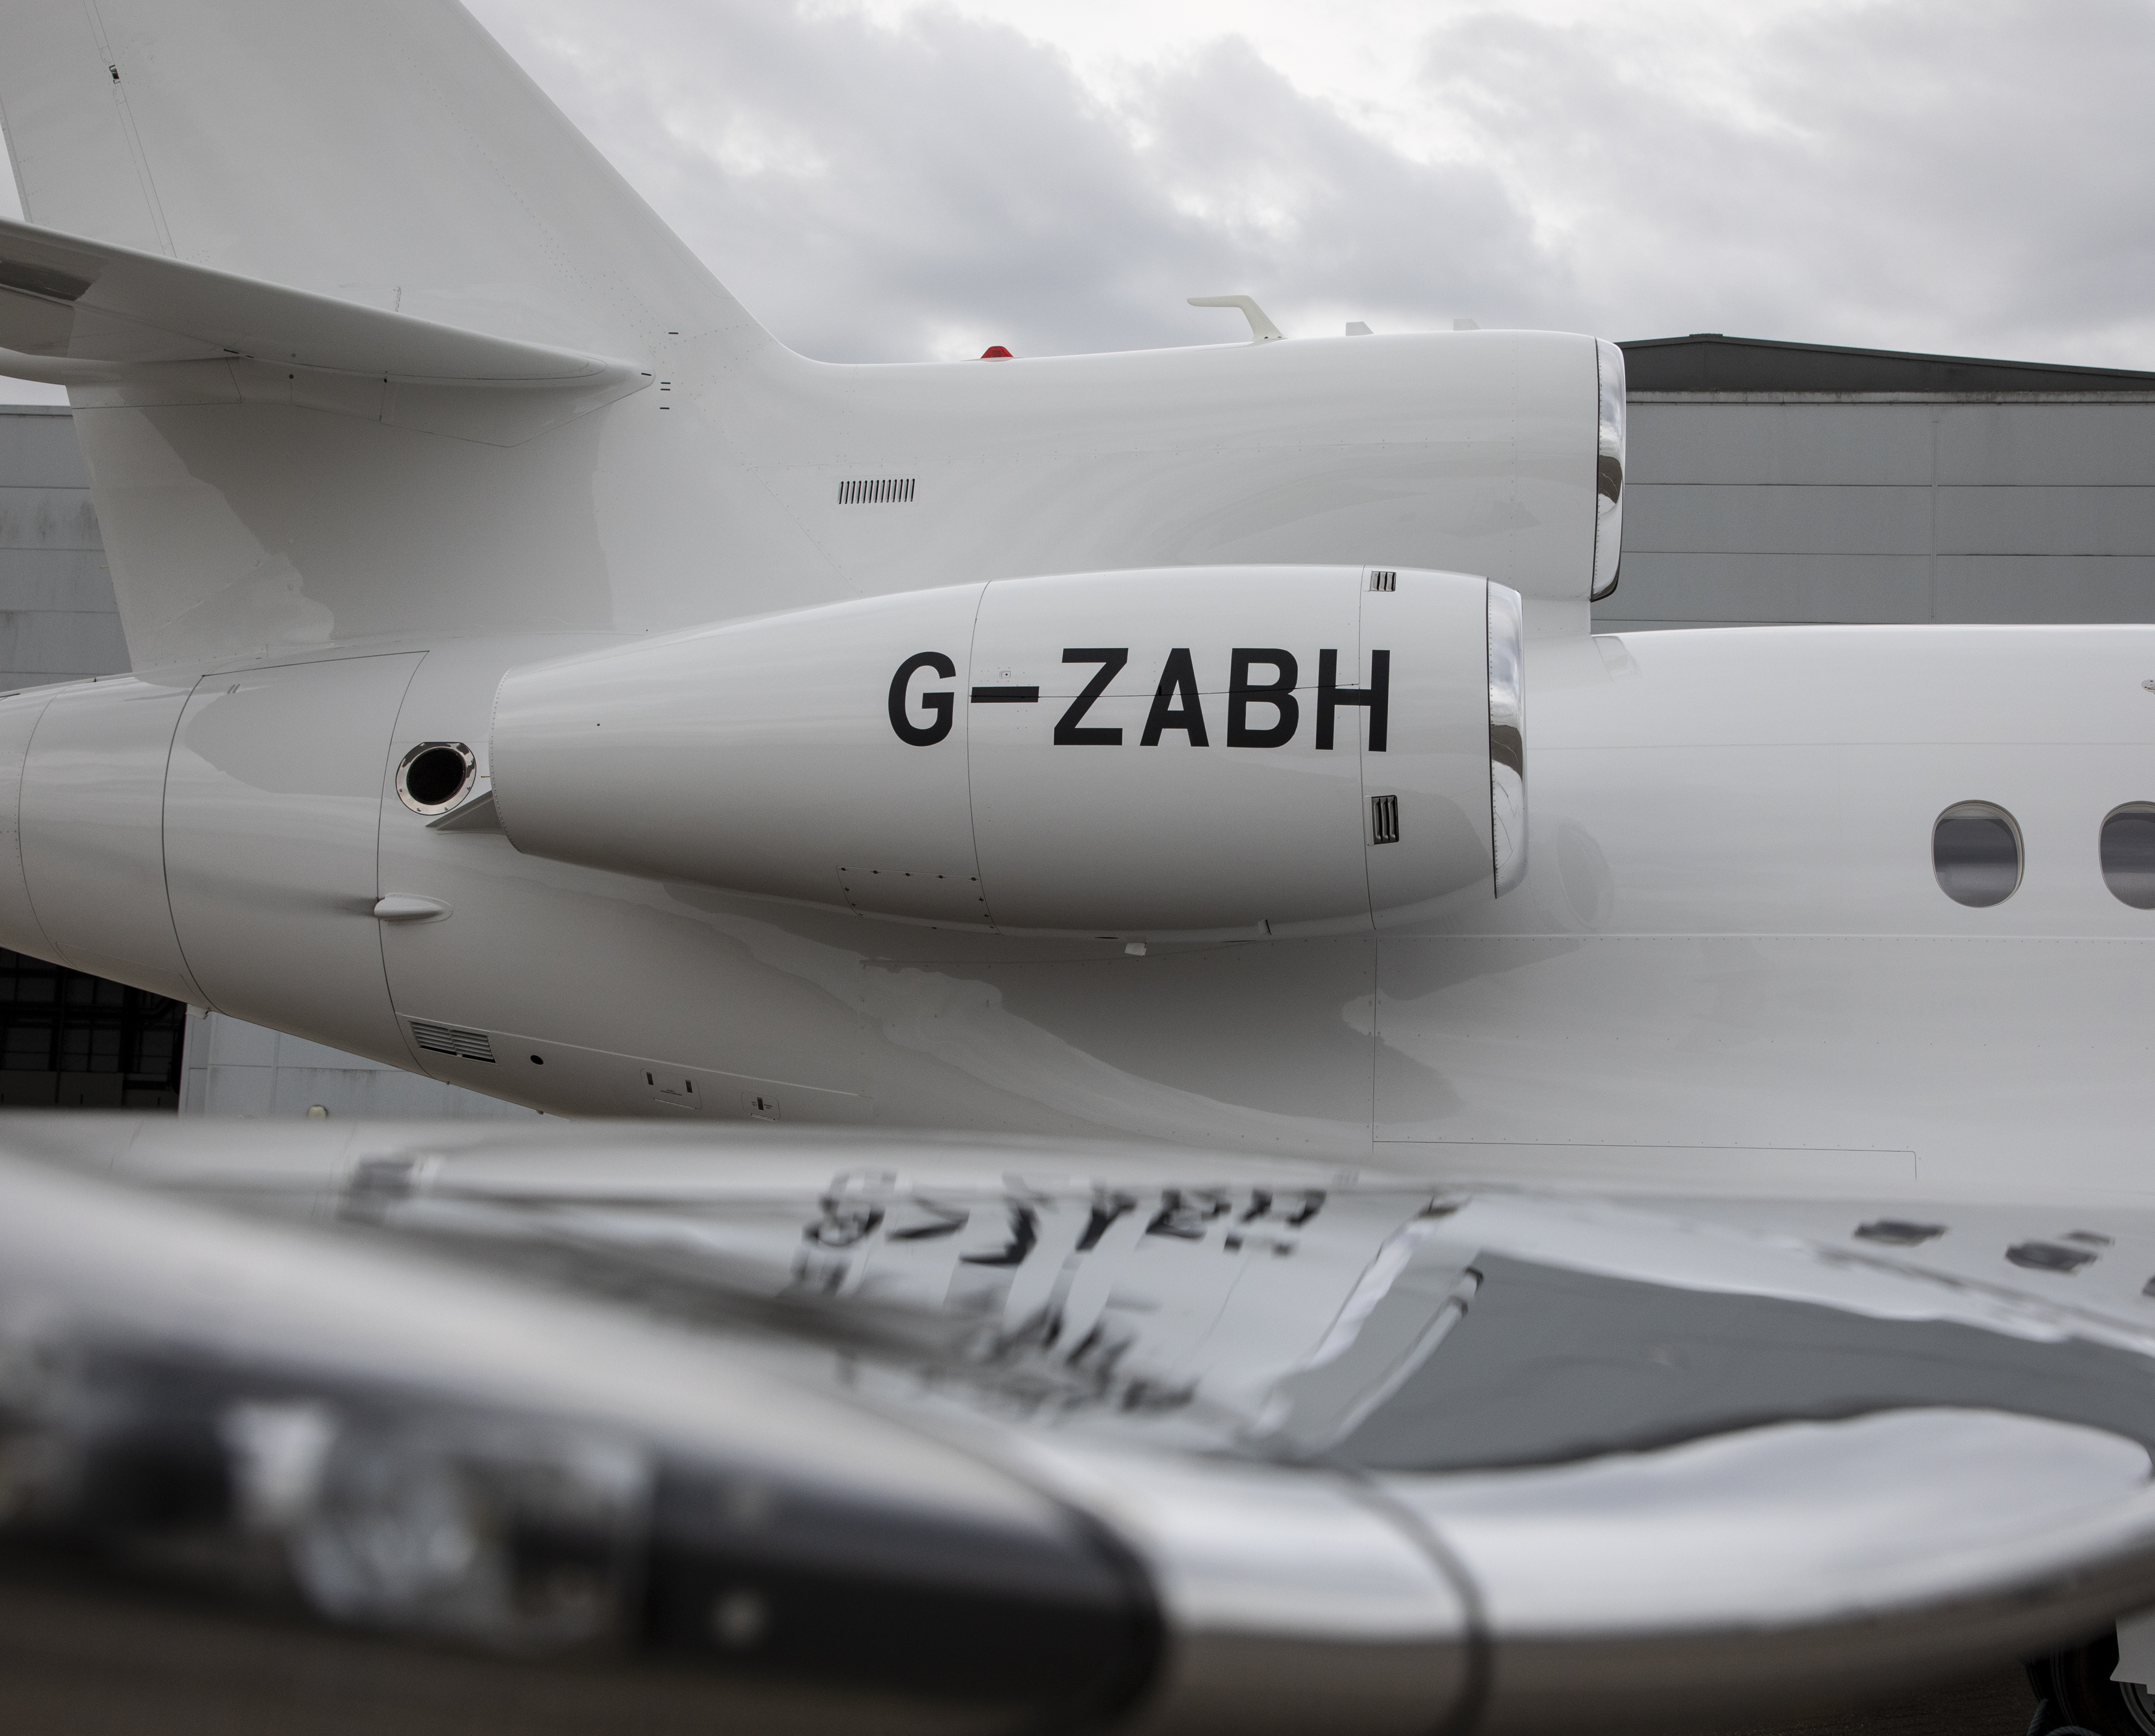 Image shows the side of the Envoy aircraft with G-ZABH painted on its side.